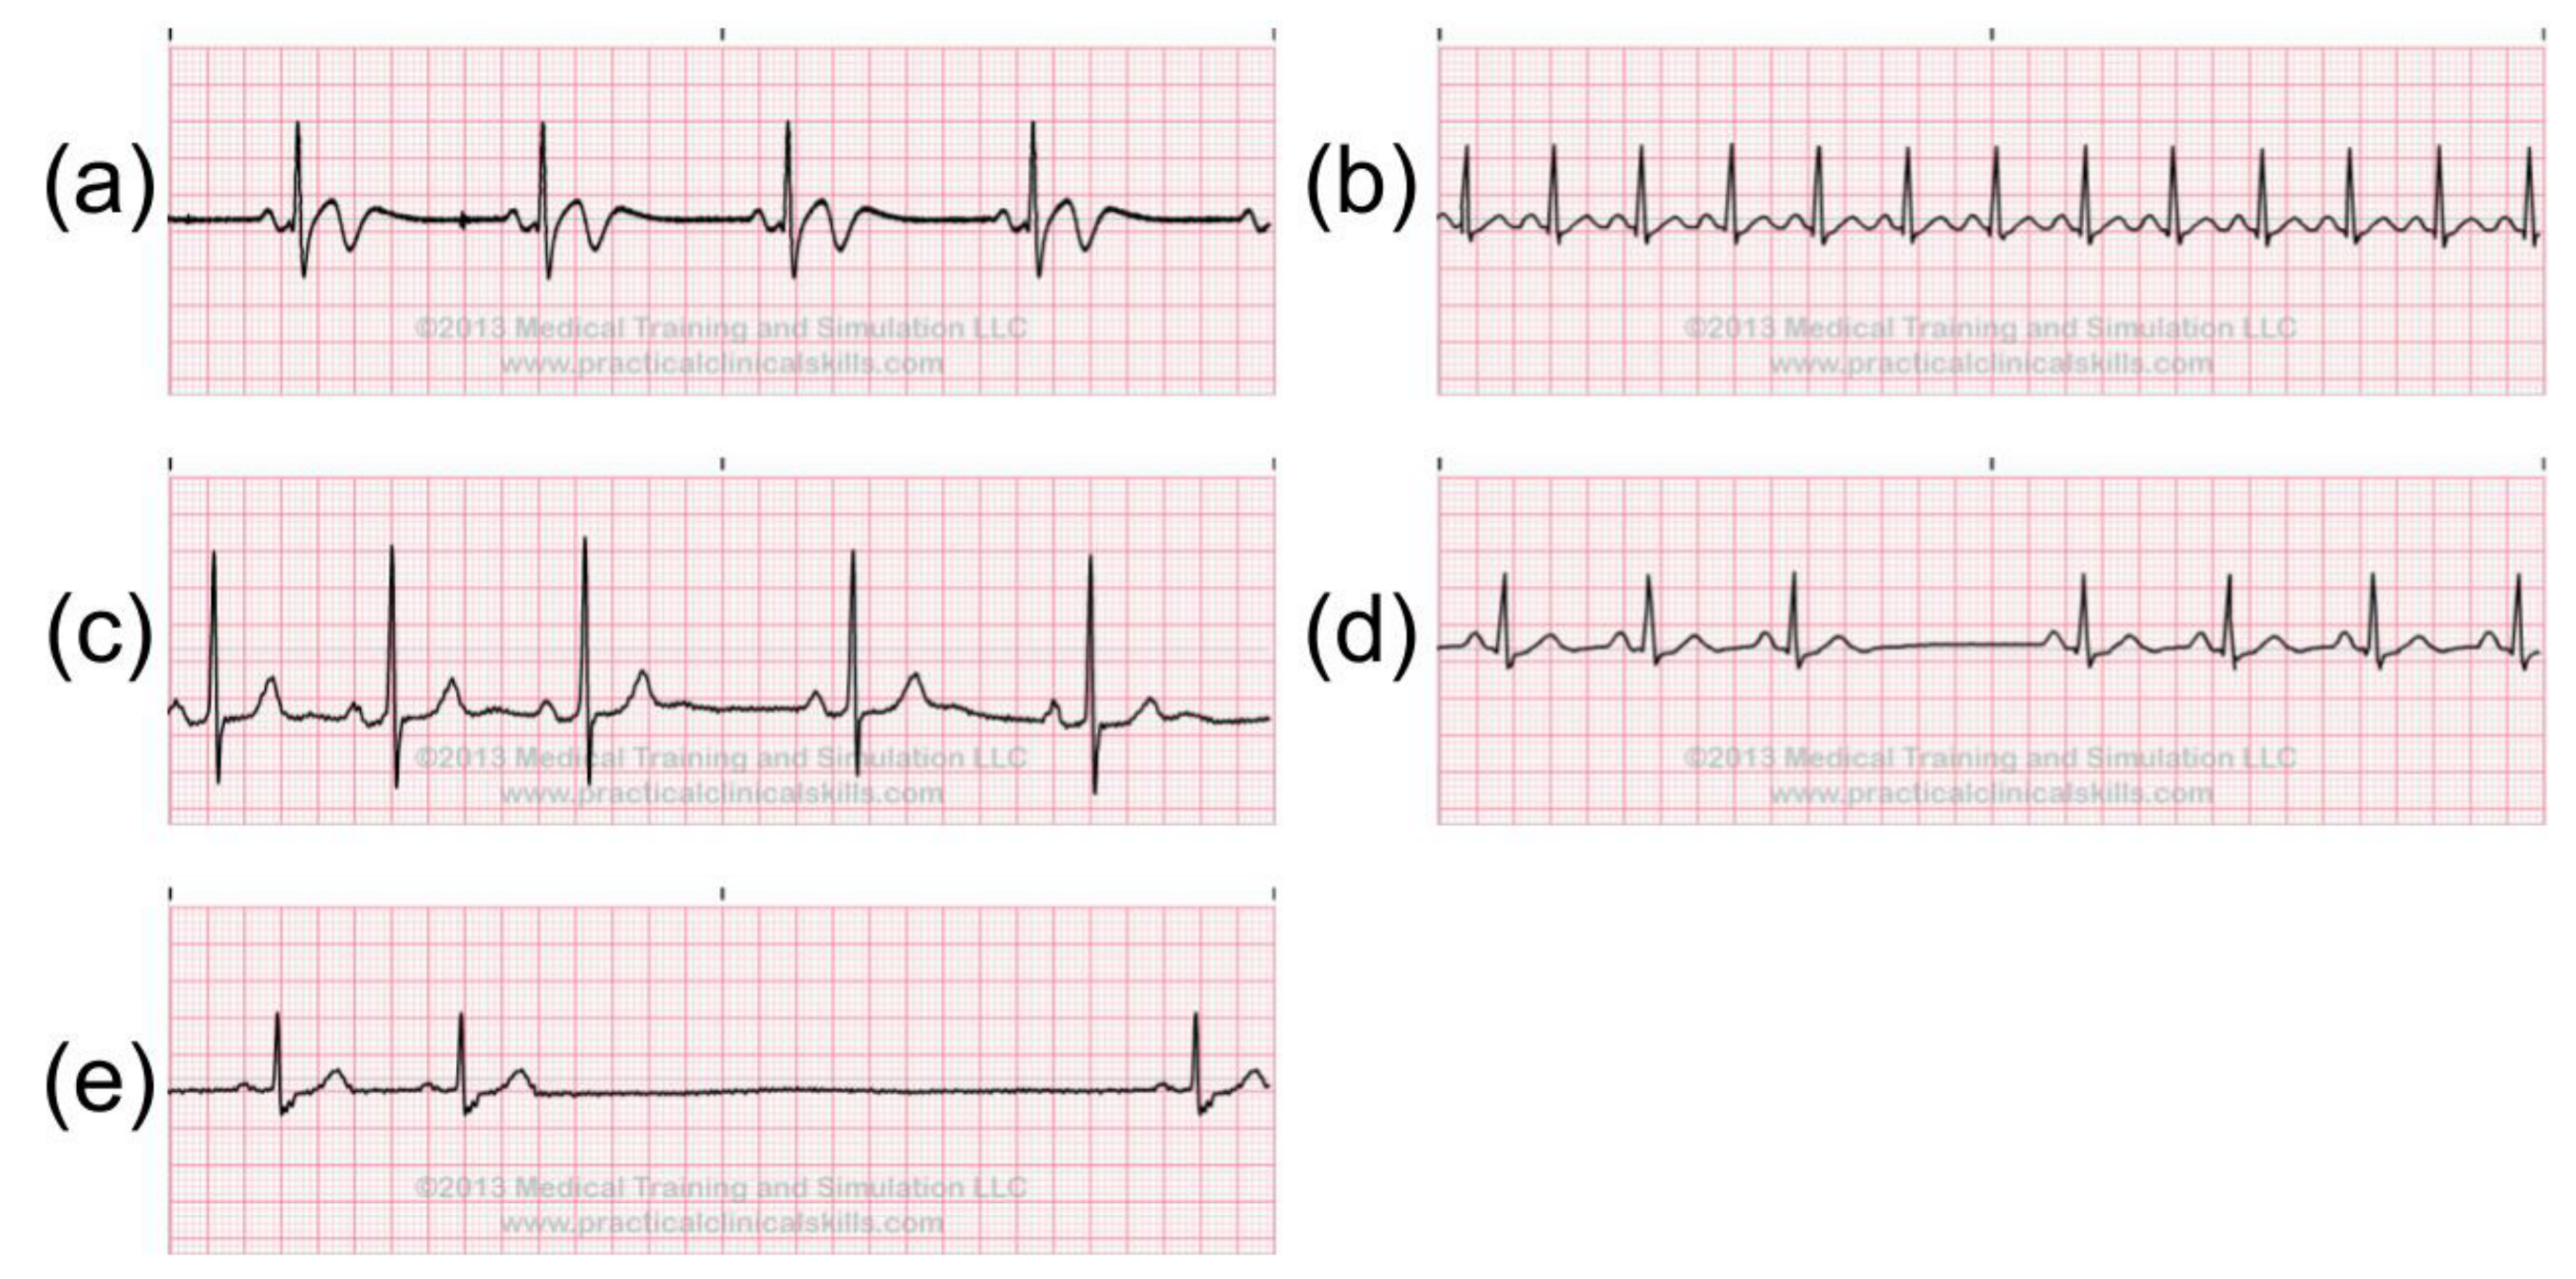 Early CVD Detection with BPM & ECG